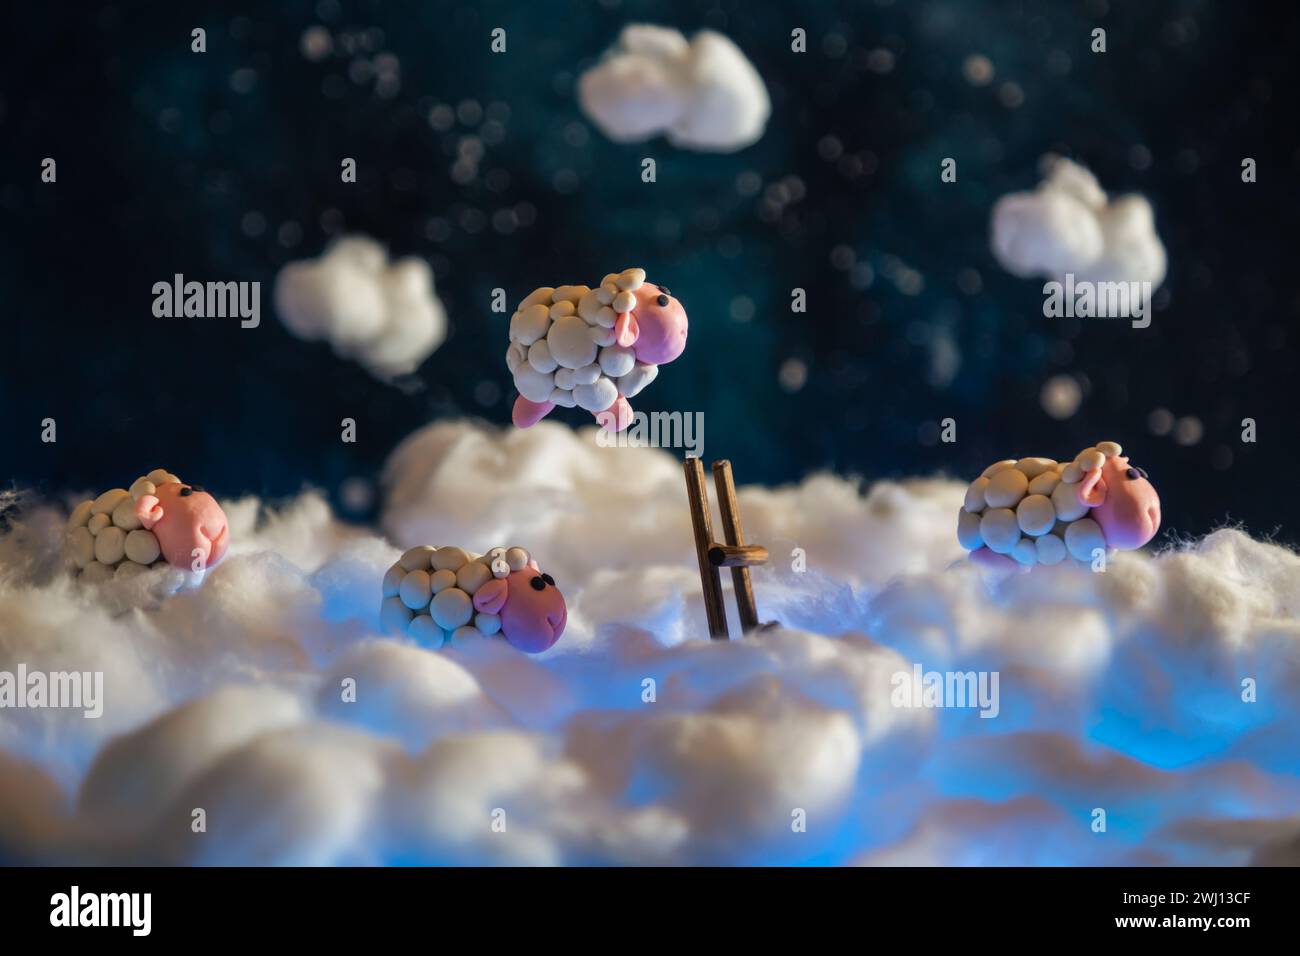 Cute plasticine sheep jumping over a fence in the clouds. Count sheep for insomnia. Night sky with stars. Stock Photo